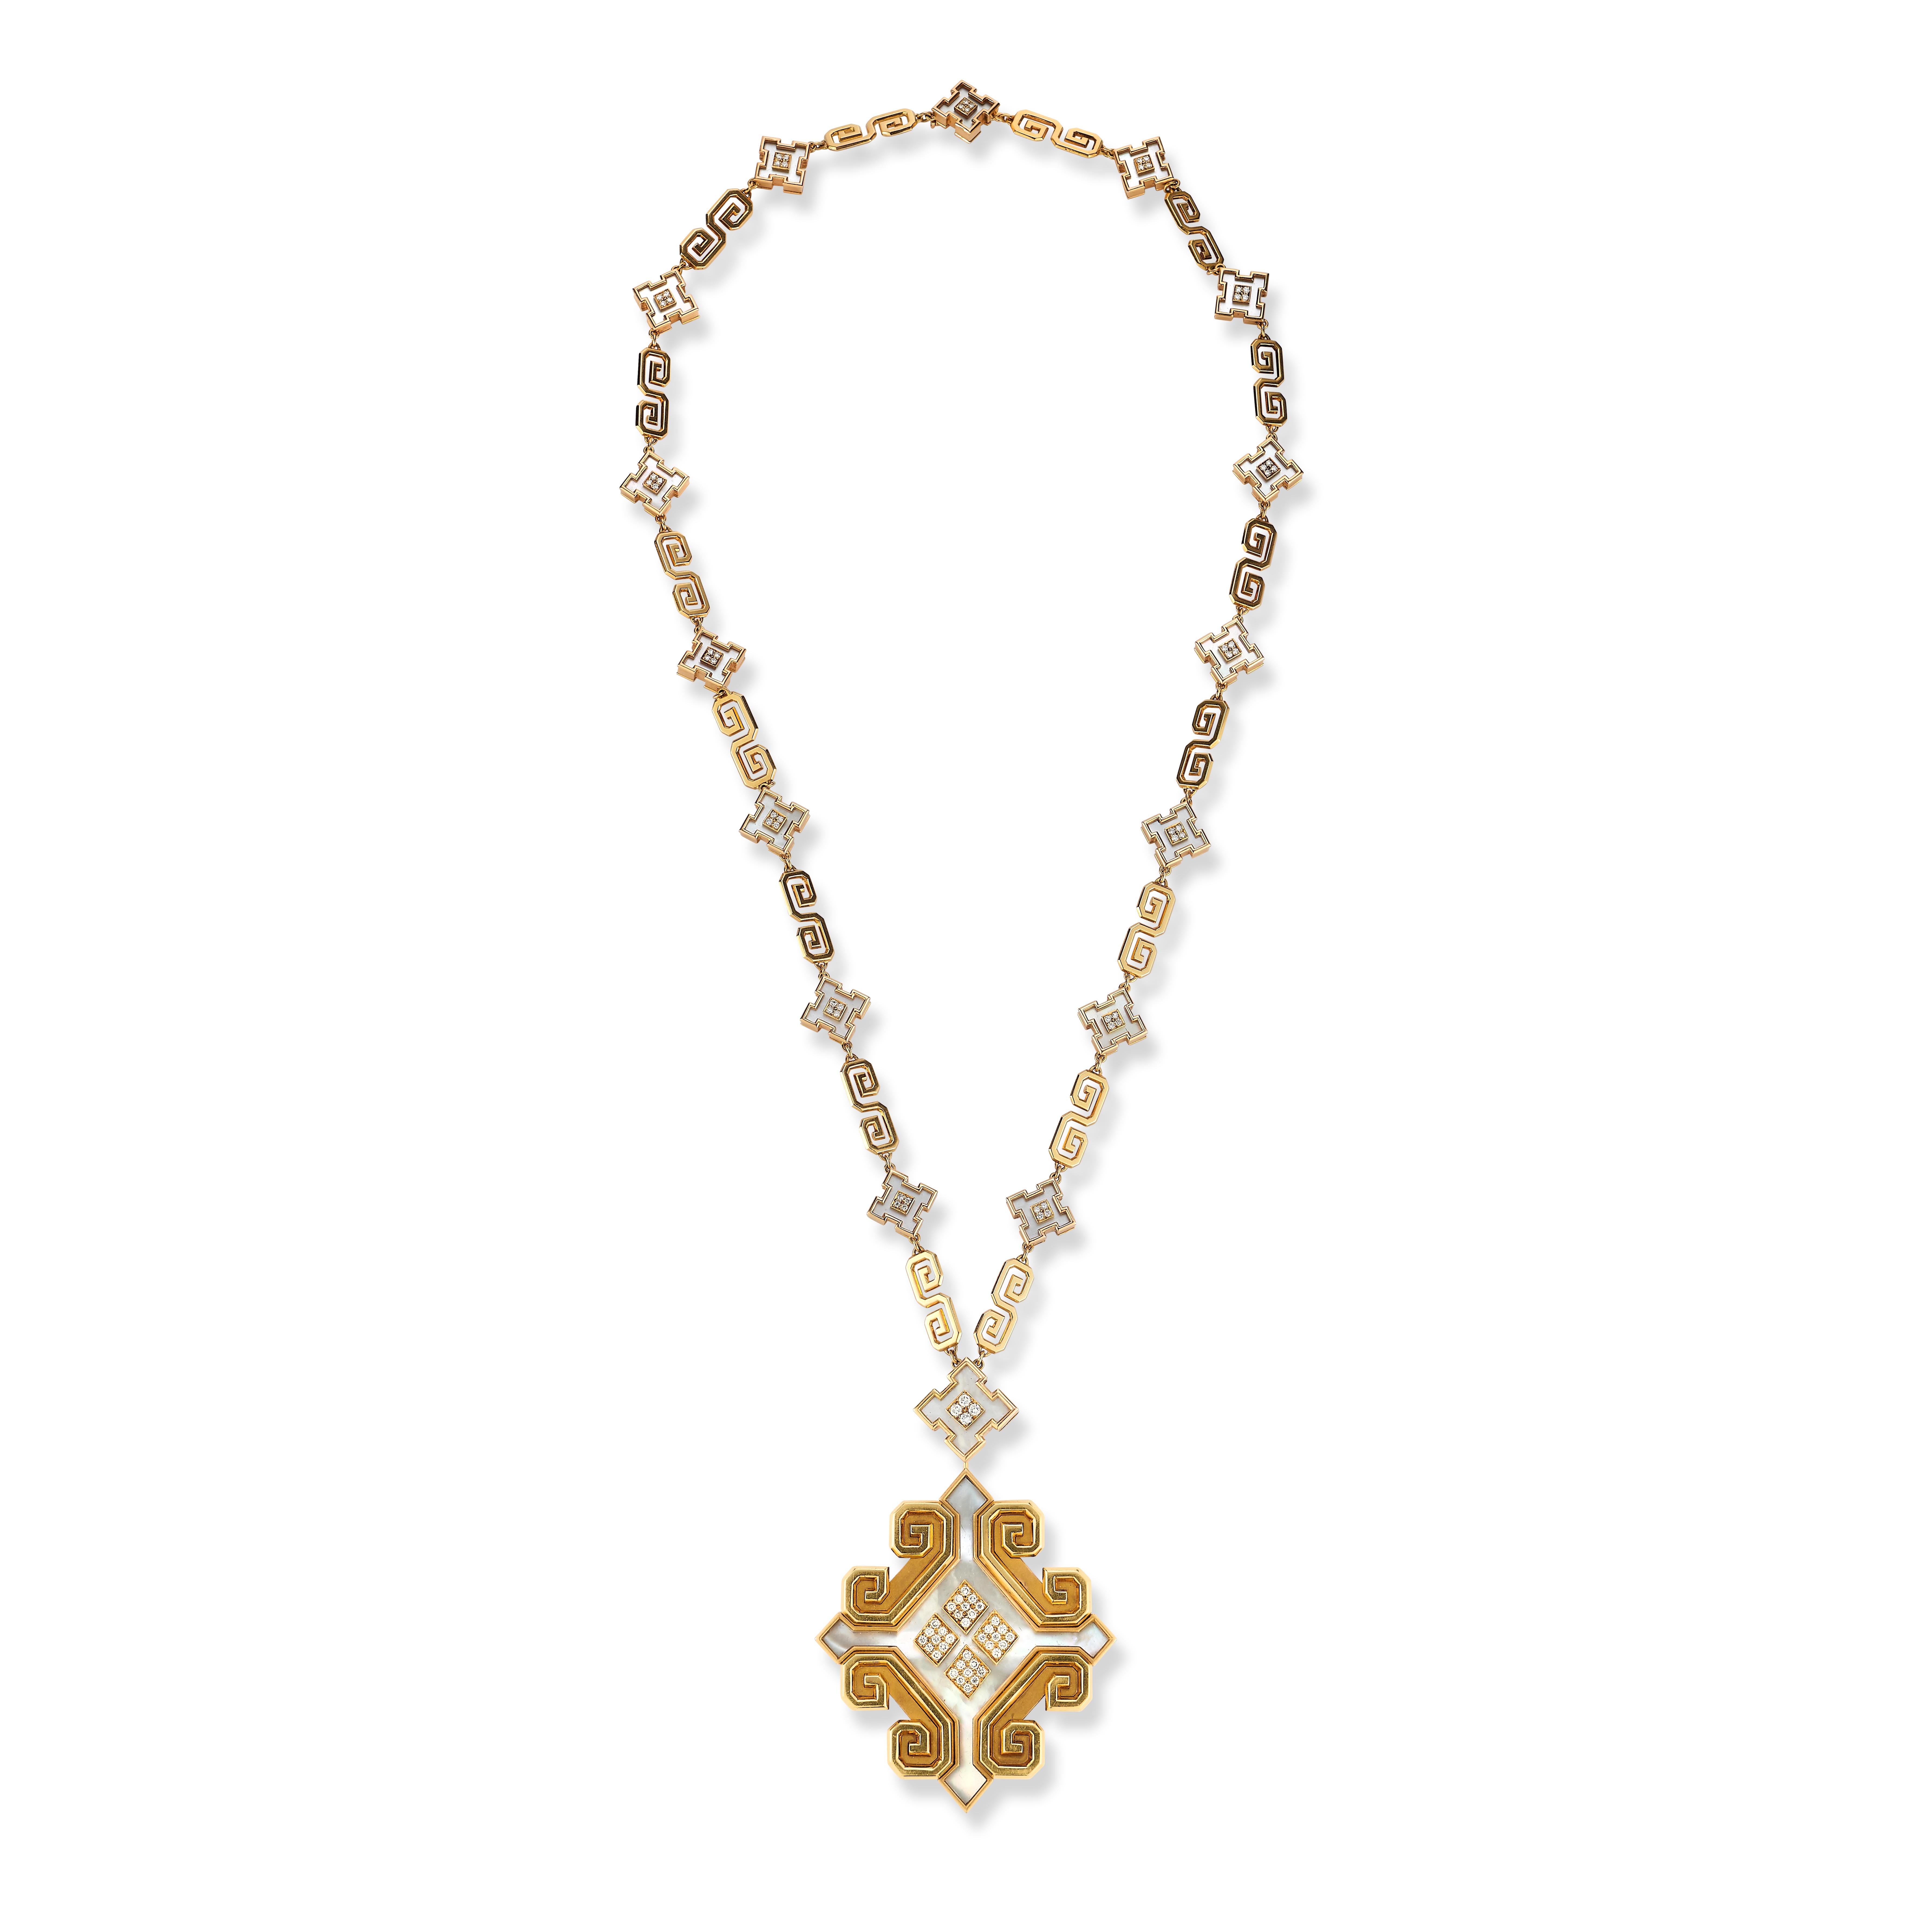 Bulgari Mother of Pearl Sautoir Necklace

Exhibited in Masterpieces of 1970-1979 in New Bond Street in 2013

An 18 karat gold pendant necklace set with round cut diamonds and mother of pearl. 

The pendant is removable allowing it to be worn as a